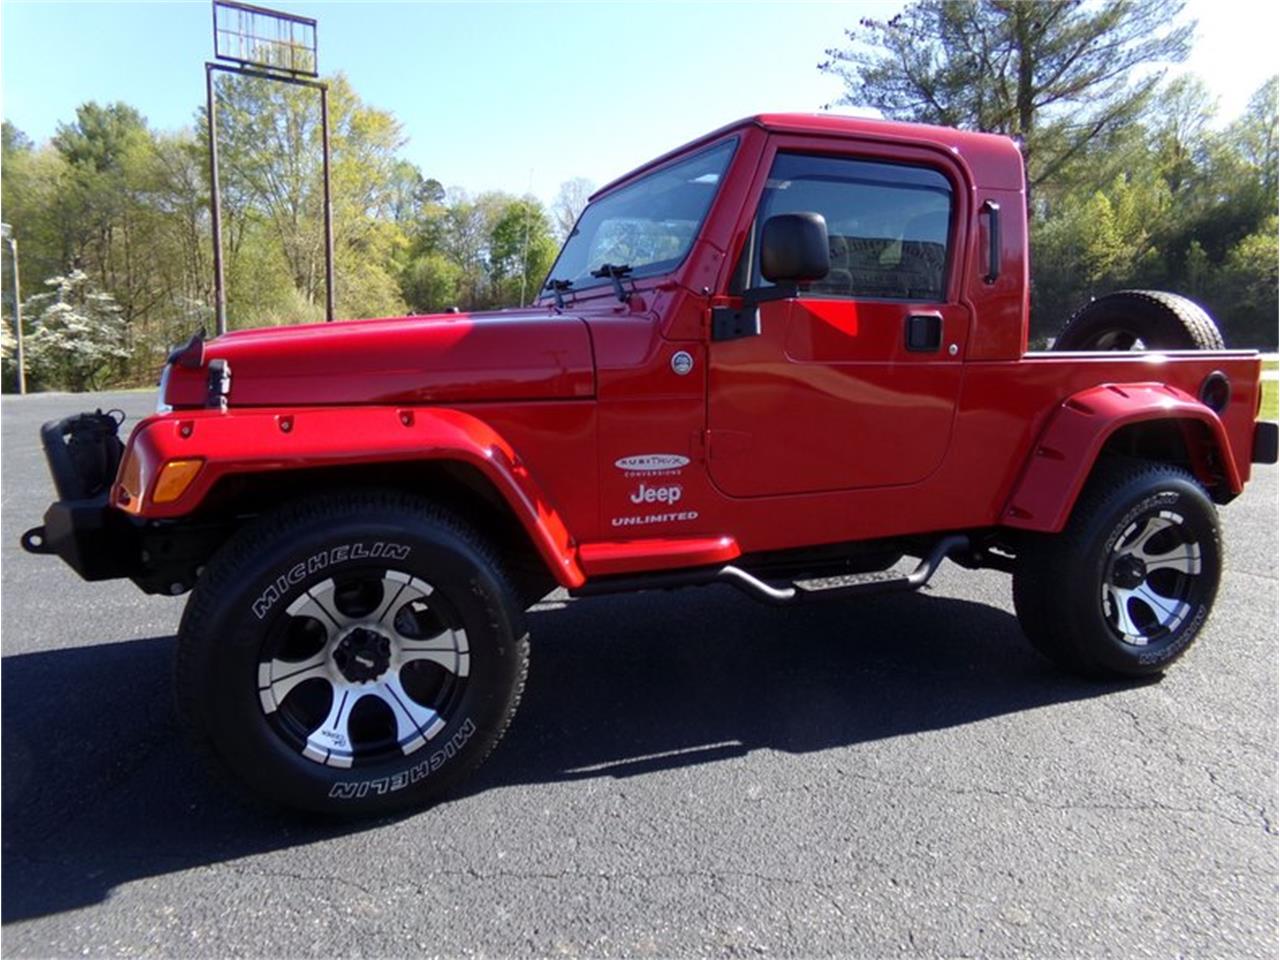 For Sale at Auction: 2006 Jeep Wrangler in Greensboro, North Carolina for sale in Greensboro, NC